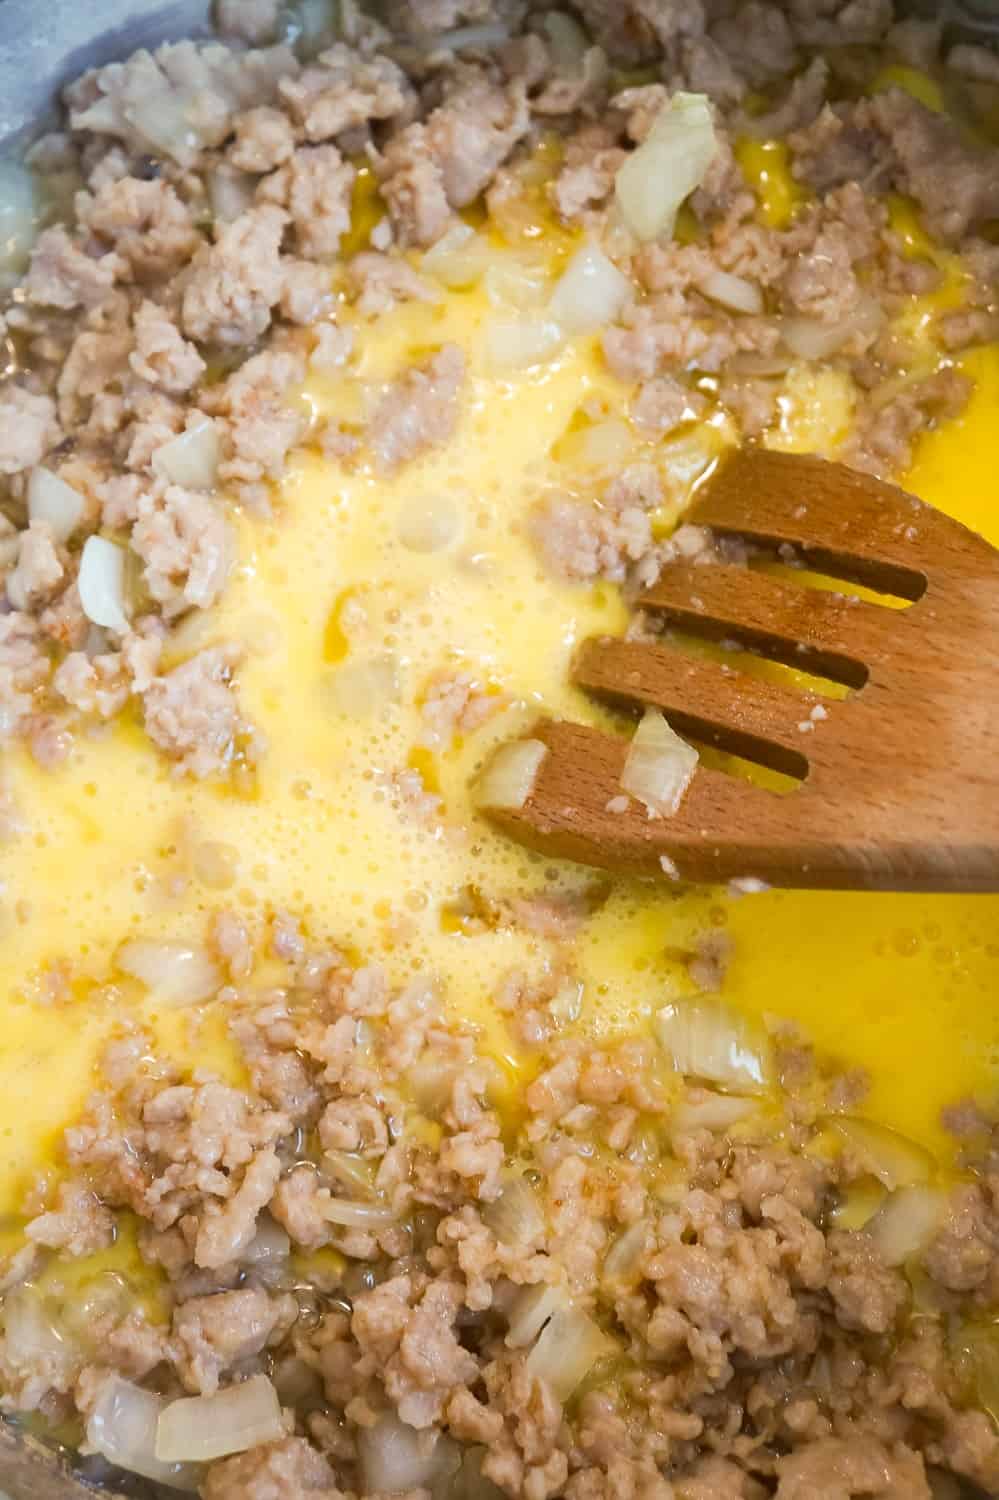 beaten eggs added to cooked sausage meat in a pan